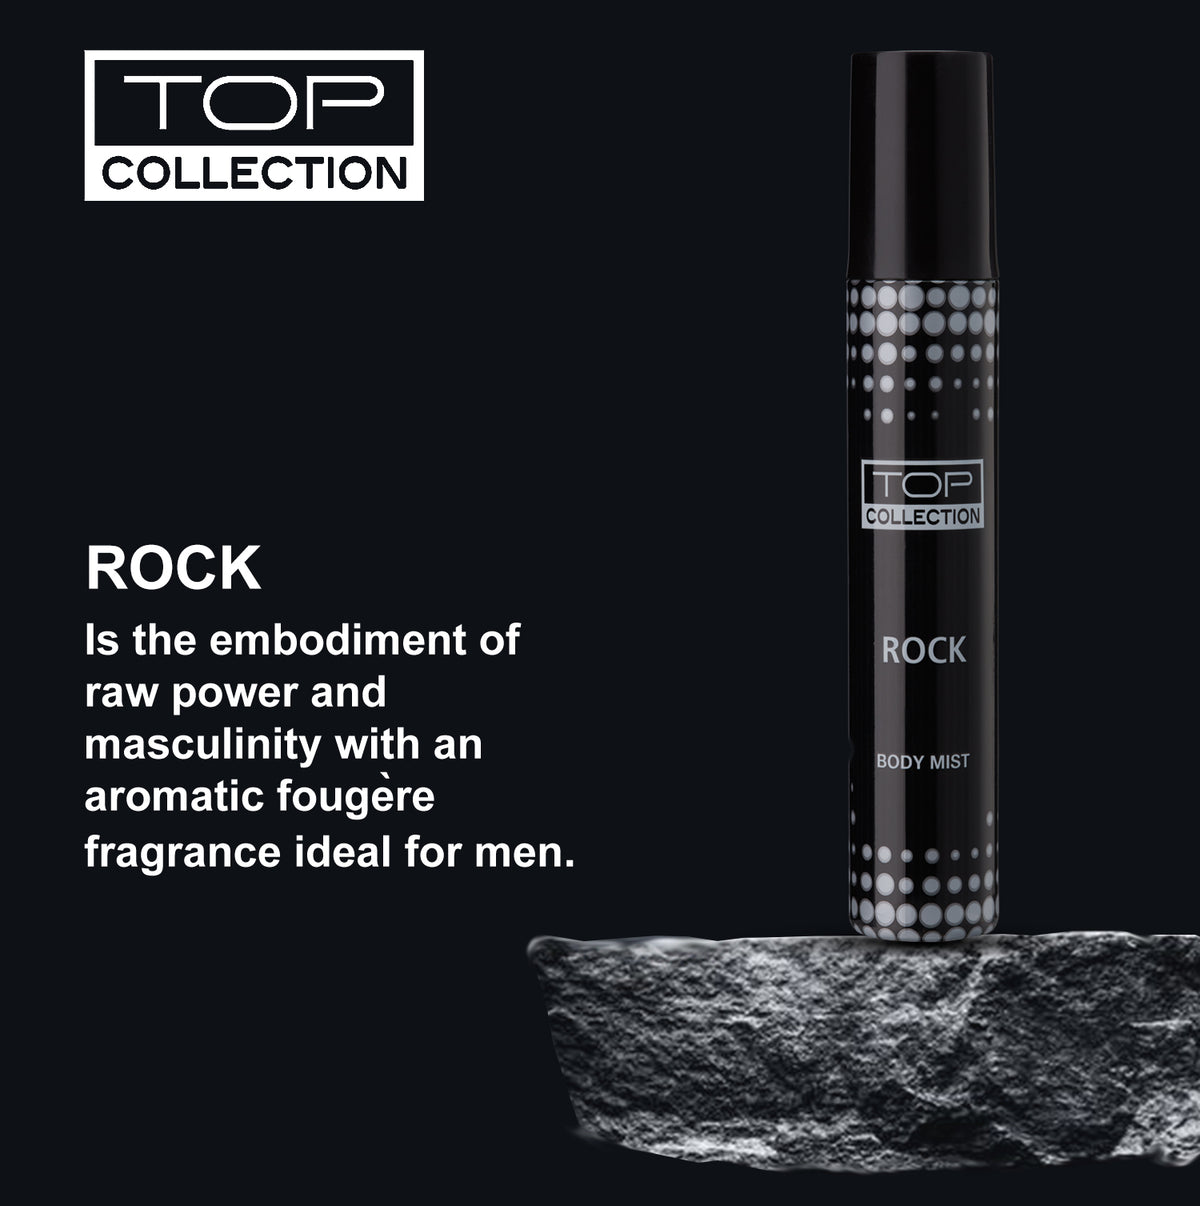 Top Collection Body Mist - Rock, 75ml